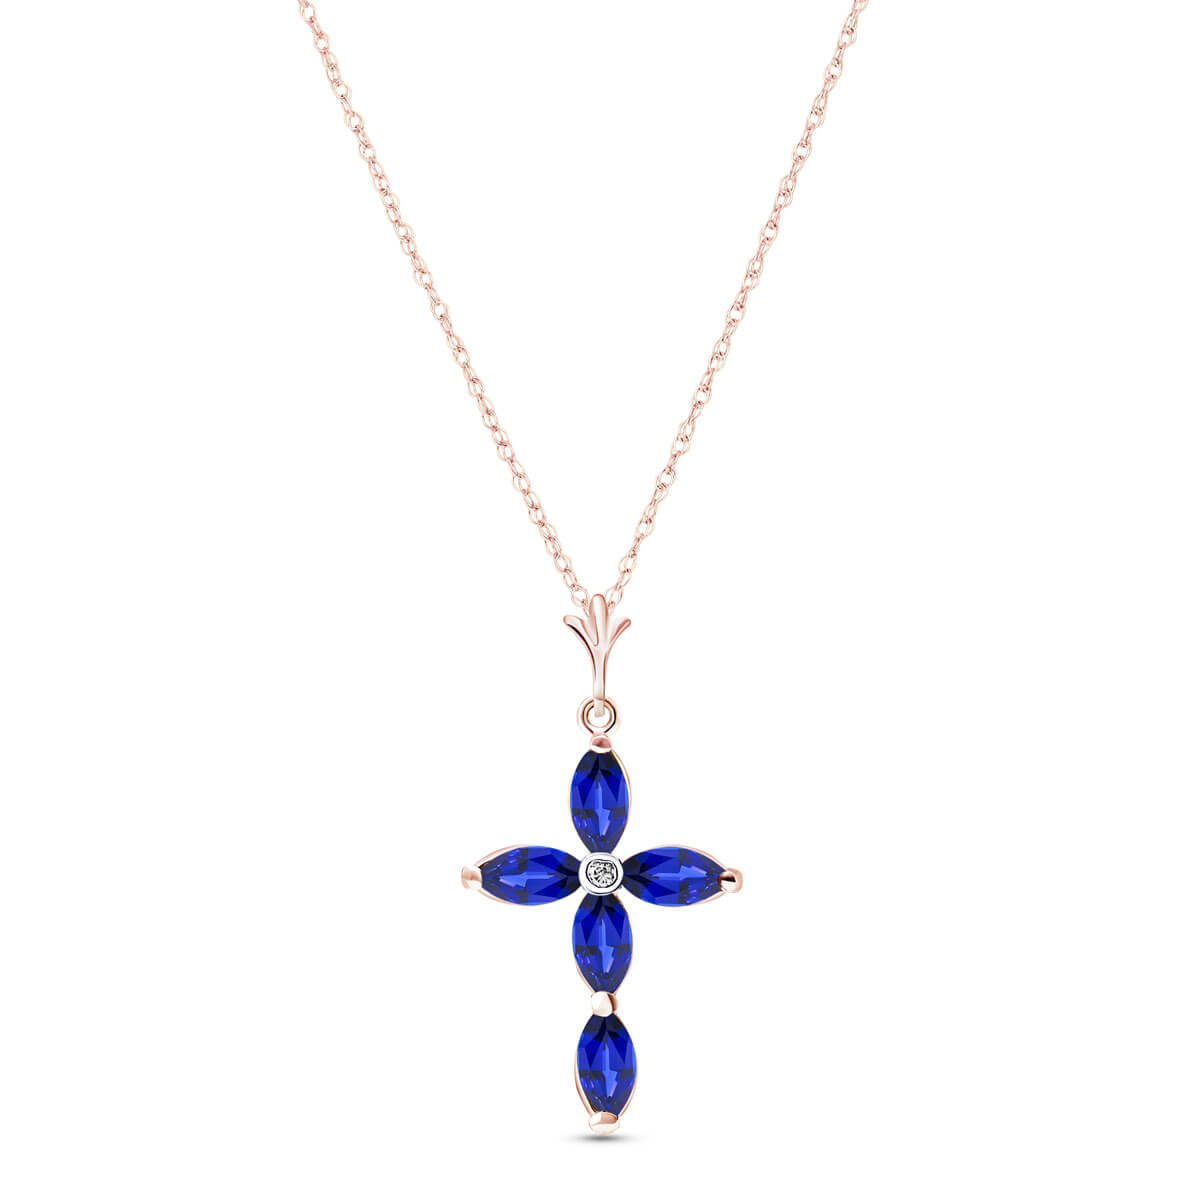 Marquise Cut Sapphire Pendant Necklace 1.1 ctw in 9ct Rose Gold